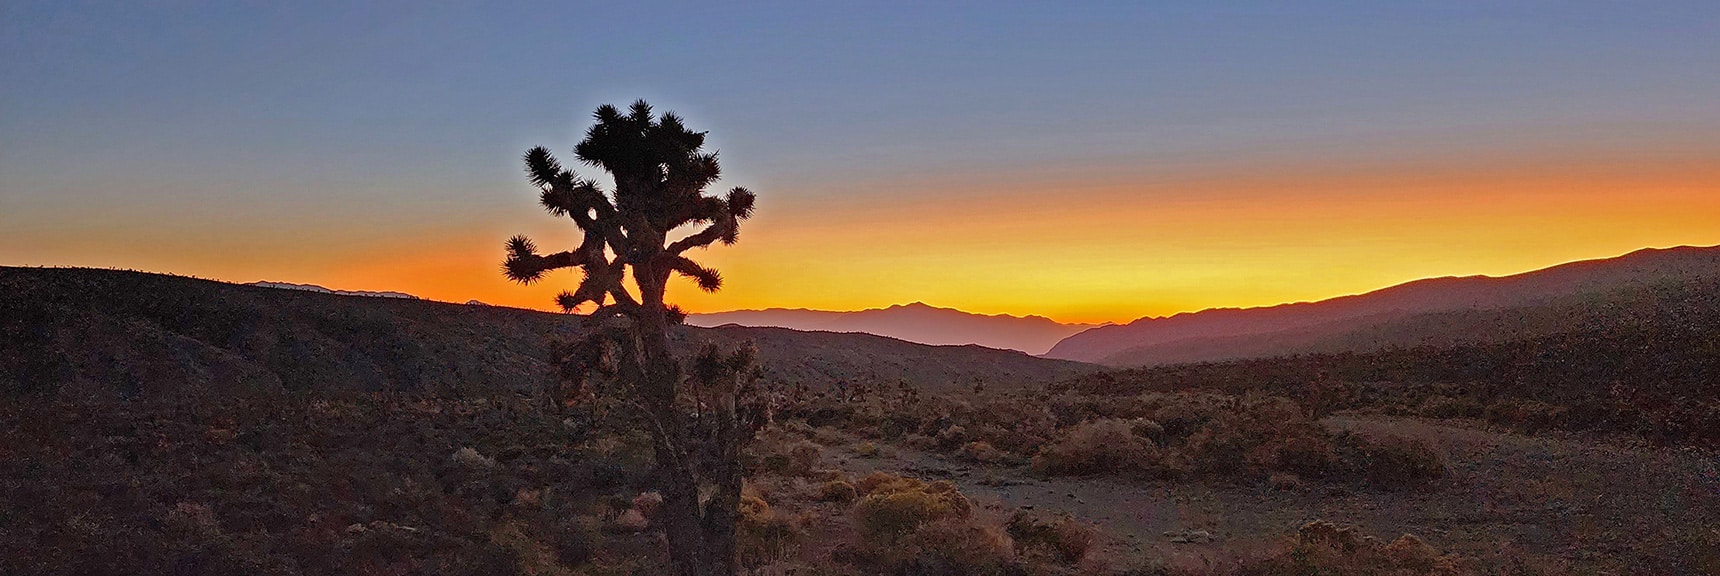 Joshua Tree Silhouette, Gass Peak Background During Atmospheric Sunrise | Kyle Canyon Grand Crossing | Northern Half | La Madre Mountains Wilderness, Nevada